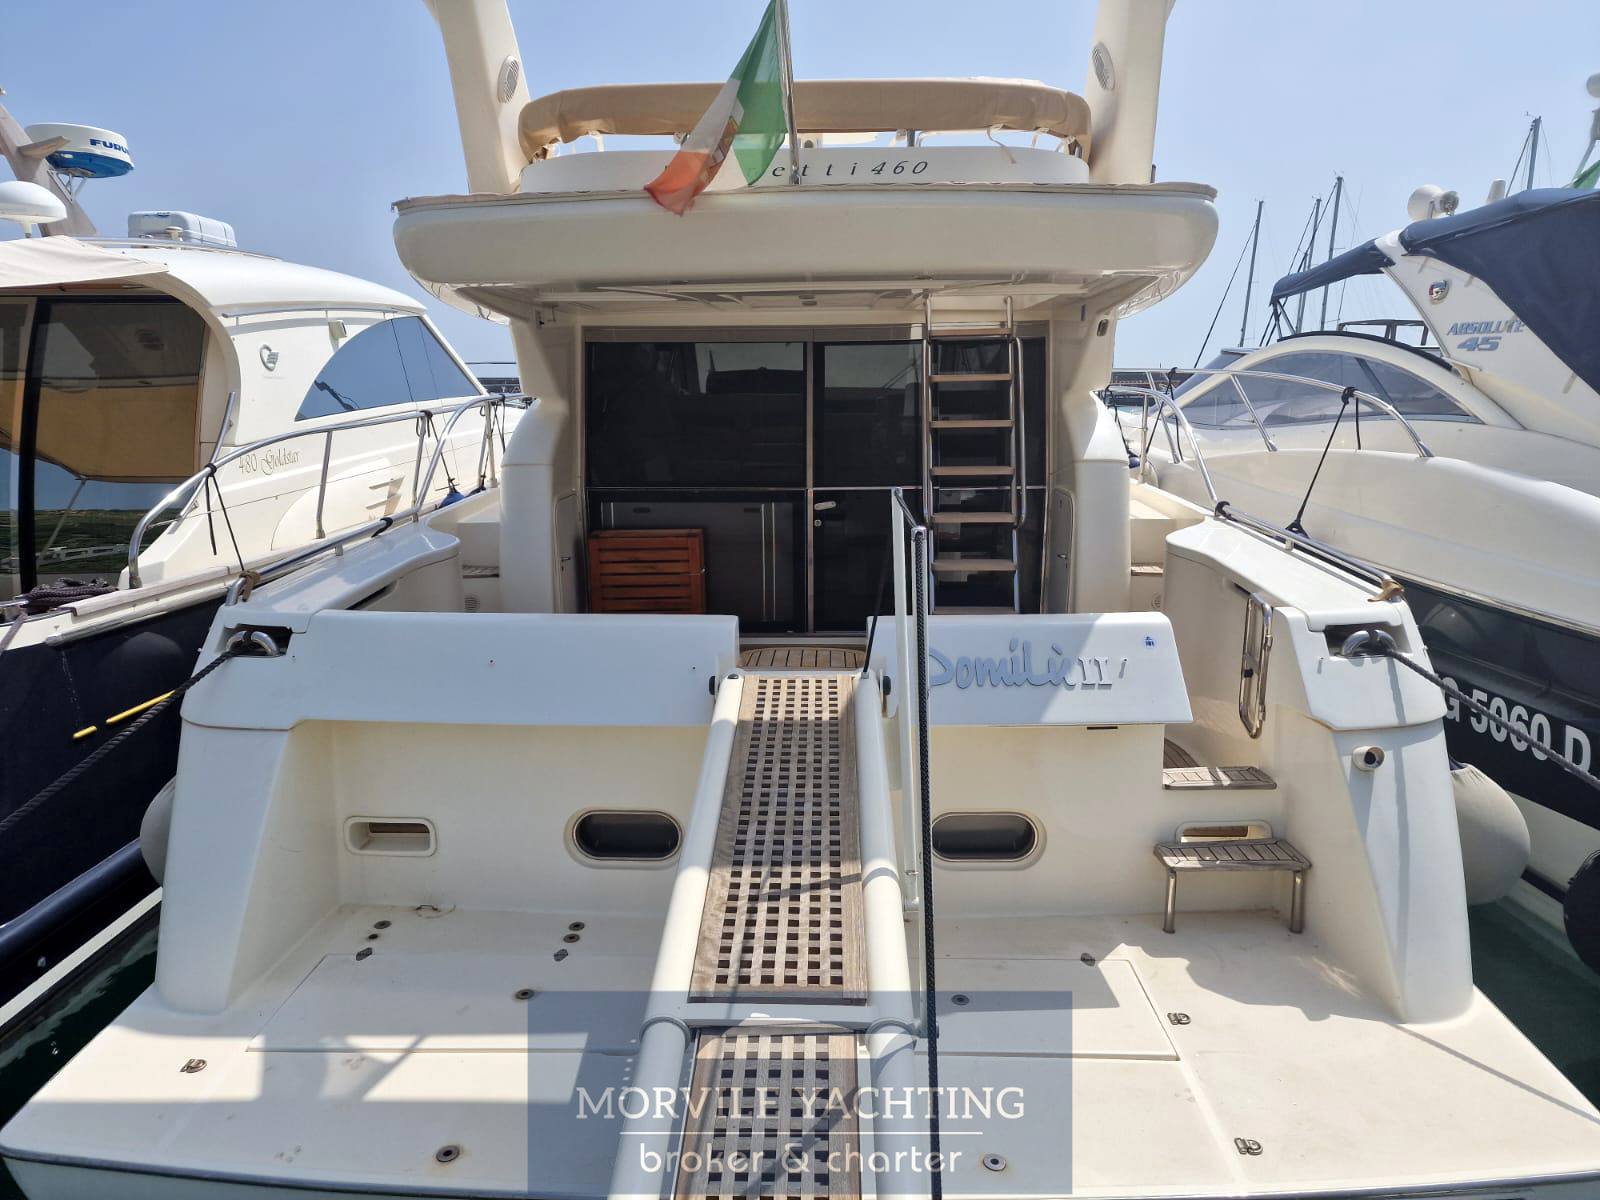 FERRETTI YACHTS 460 Motor boat used for sale